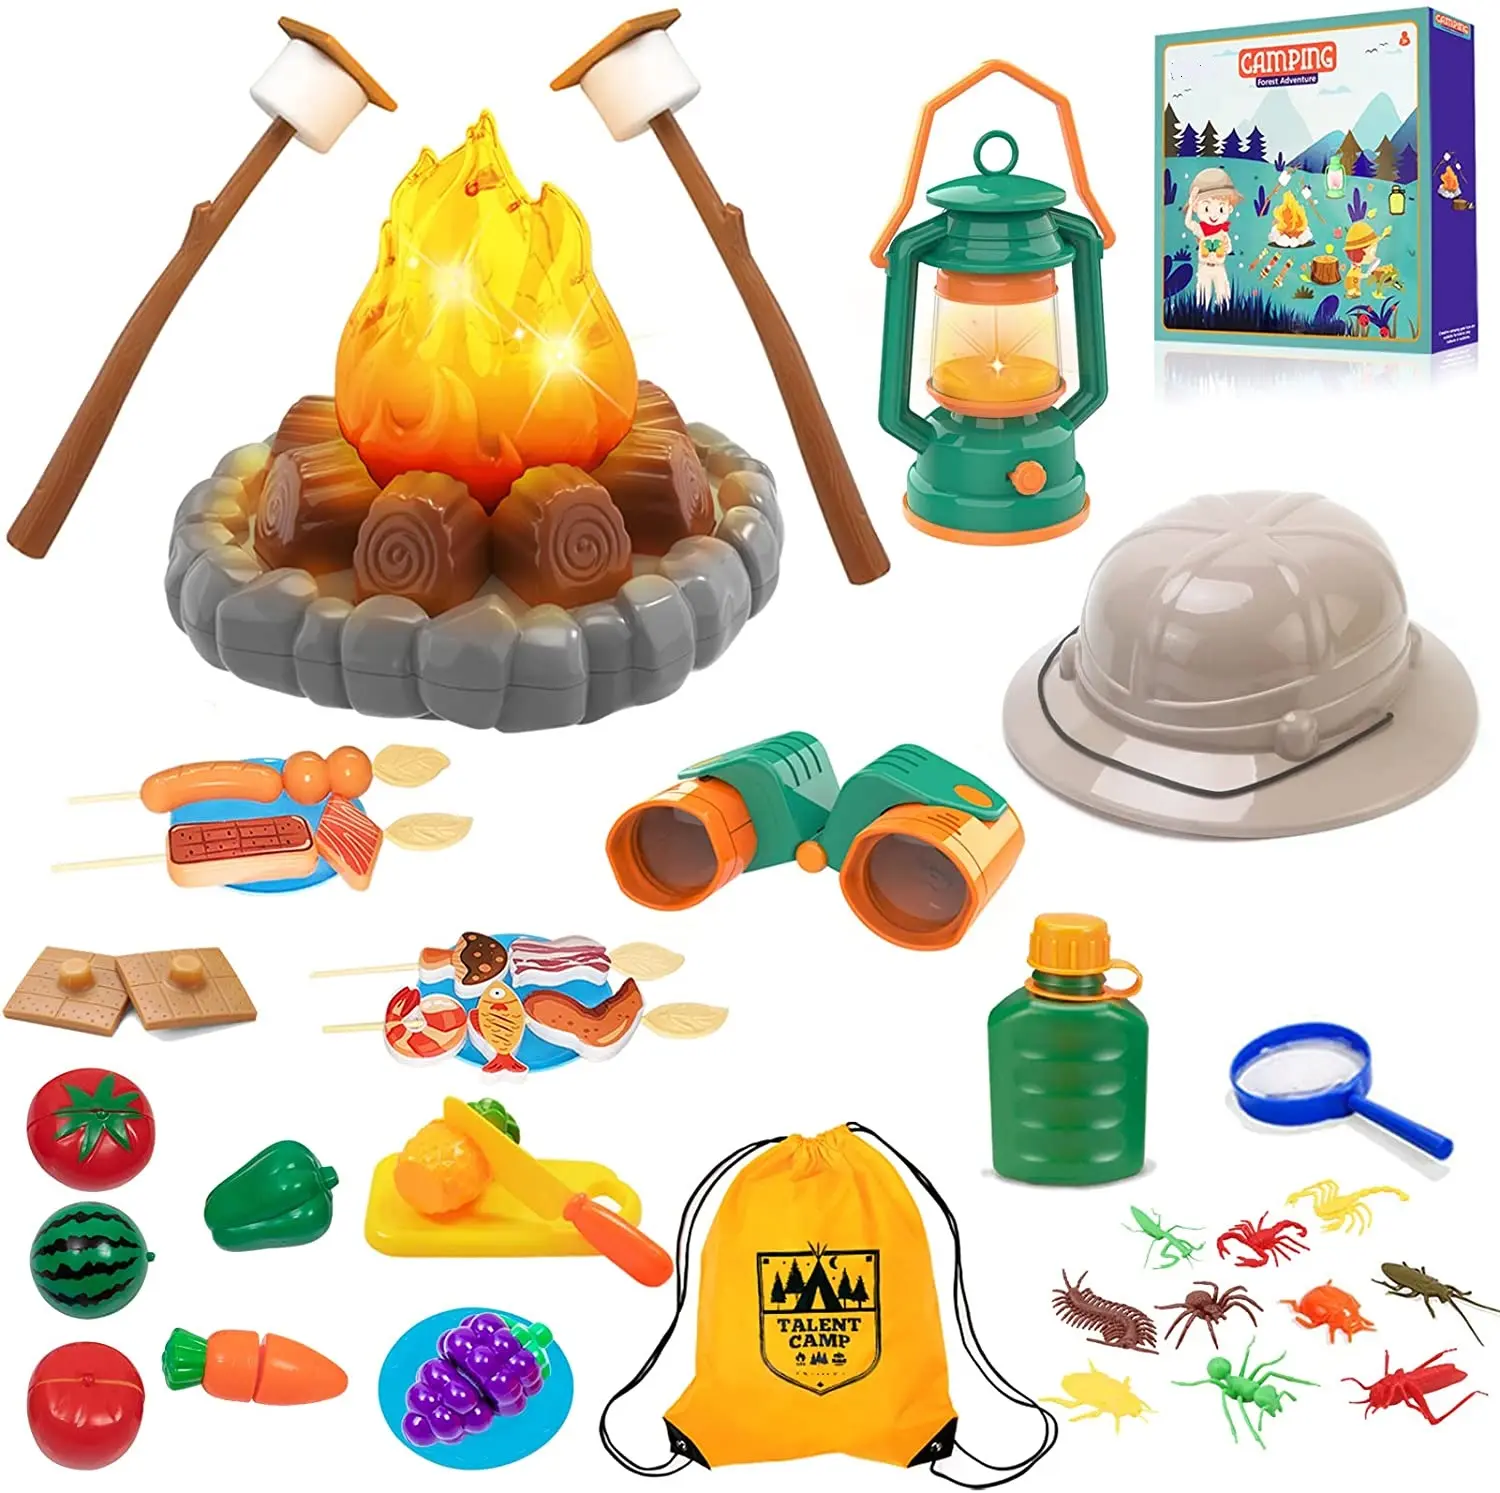 Camping Play Set Indoor Outdoor Toys for Kids Pretend Play Game Simulate the Real Camping Activities